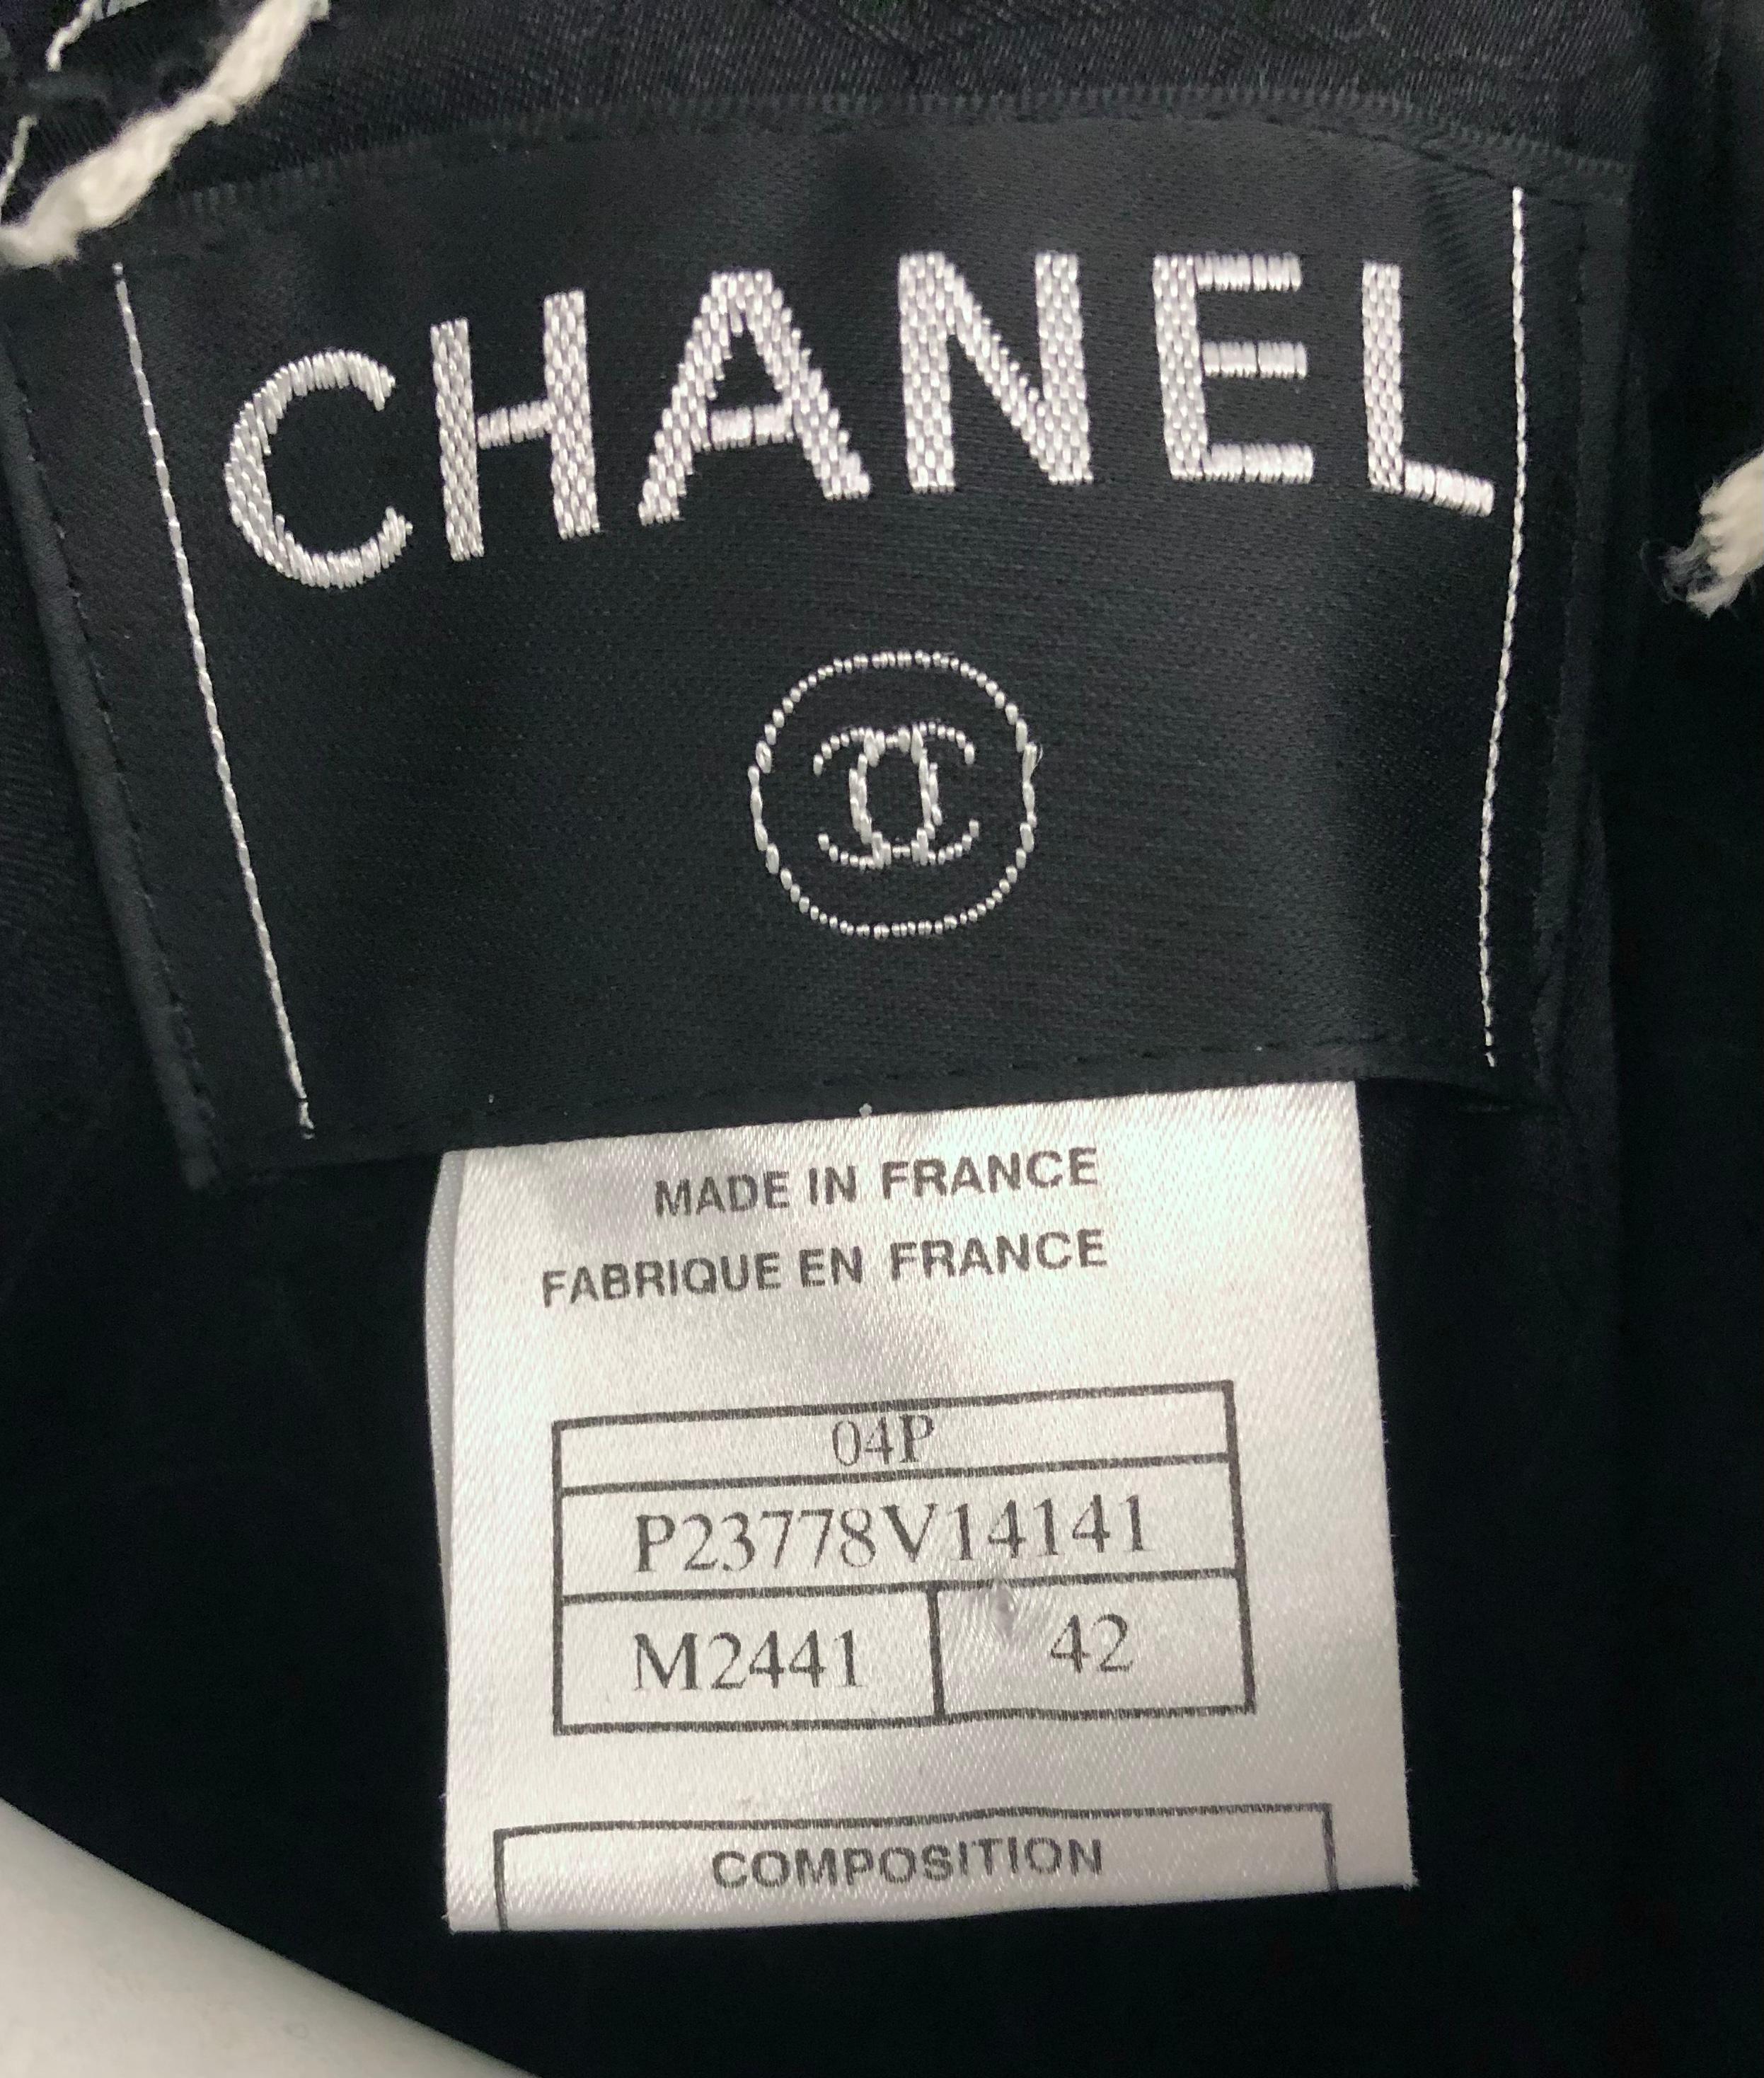 Chanel Spring 2004 Black and White Tweed Jacket with Frayed Edge Throughout  For Sale 2